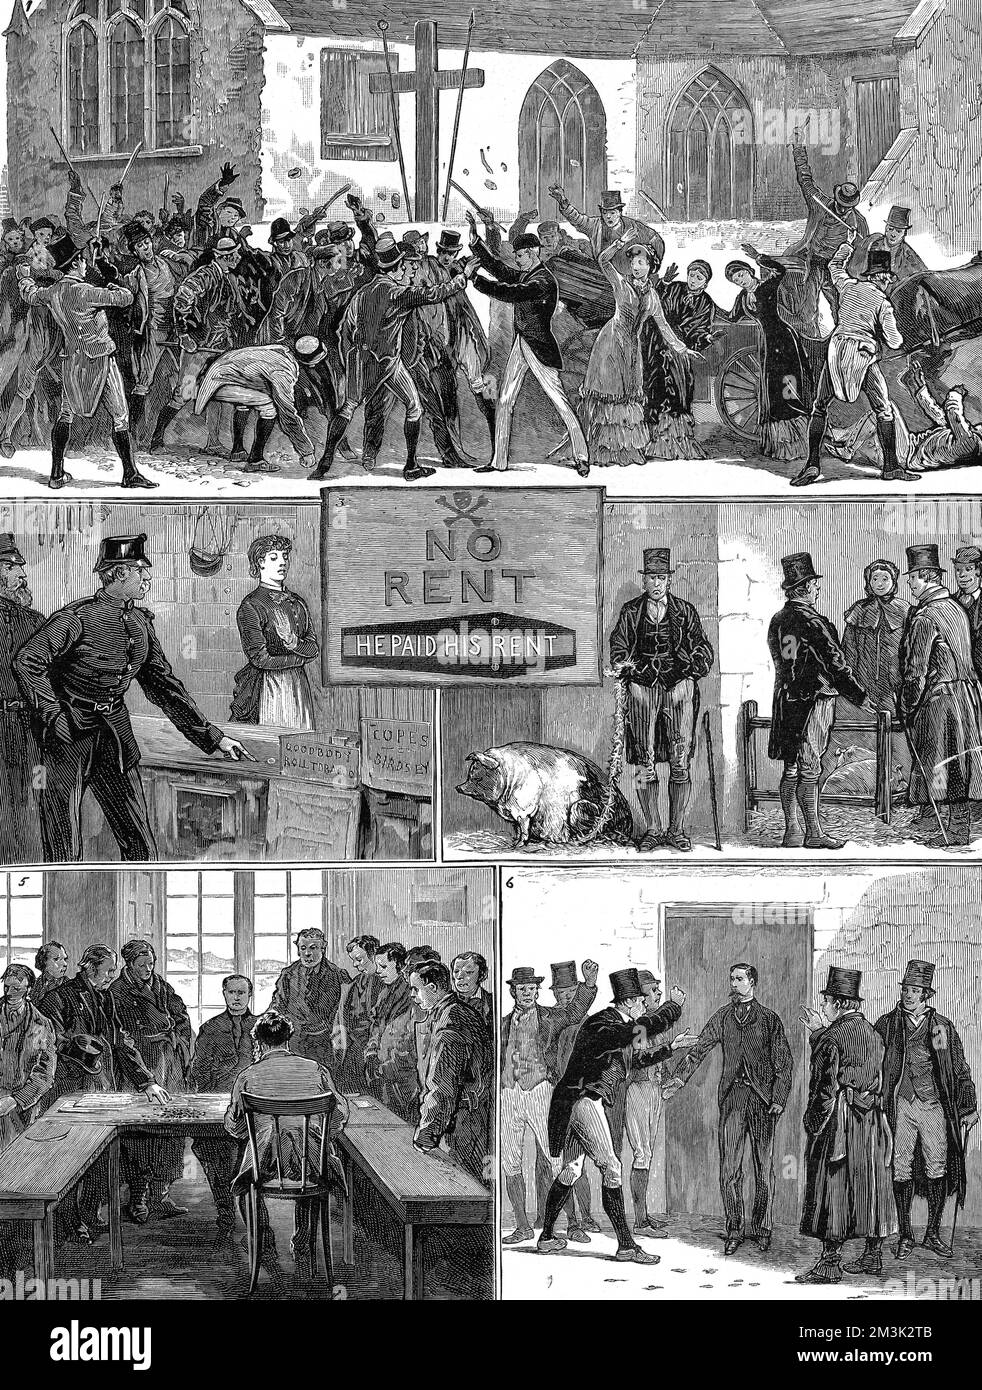 Scenes in the late 19th century during the Rent War in Tipperary as follows: 1. A Riot at Templebraden, Limerick County  2. Boycotted Policemen 3. A 'No Rent' Placard  4. Boycotted at the Pig Market, Tipperary  5. A collection at the Town Hall, Tipperary, in aid of the Political Prisoners Maintenance Fund.  6. Tenants demonstrating in Tipperary, refusing to pay rent.  1881 Stock Photo